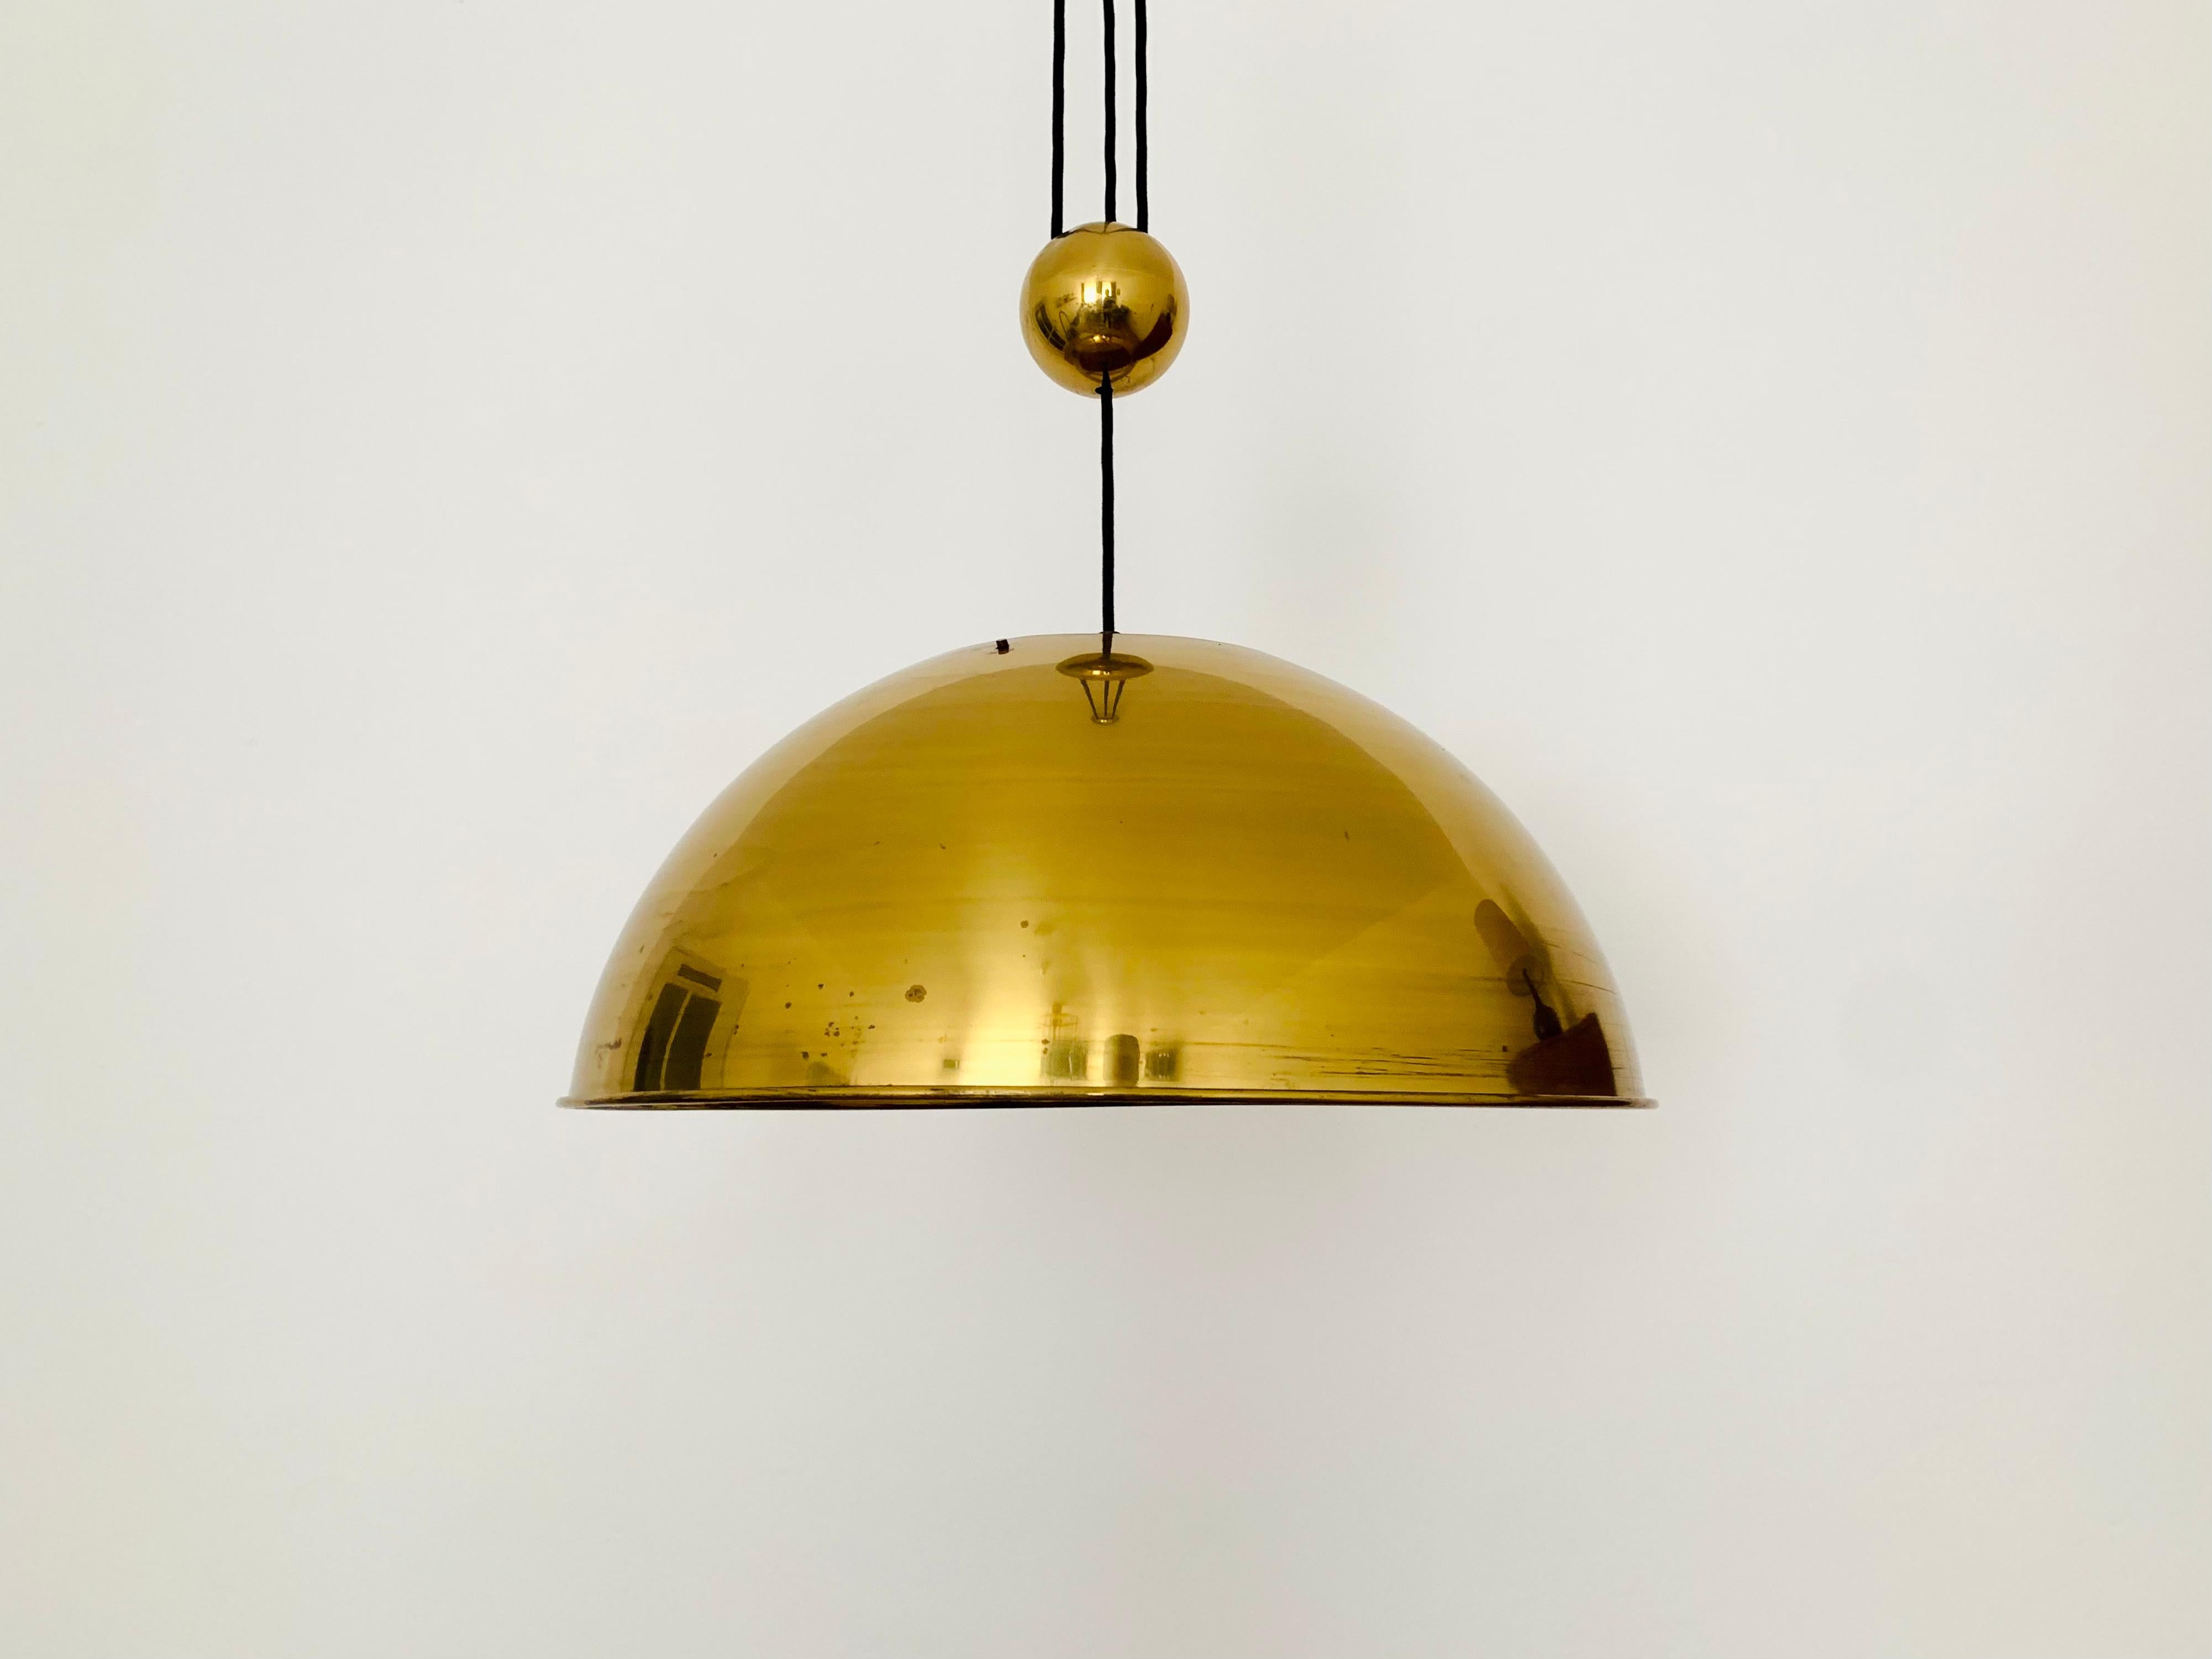 Very beautiful and rare brass ceiling lamp from the 1960s.
The lighting effect of the lamp is extremely beautiful.
The design and the very beautiful details create a very elegant and pleasant light.
The lamp creates a very cozy atmosphere and is